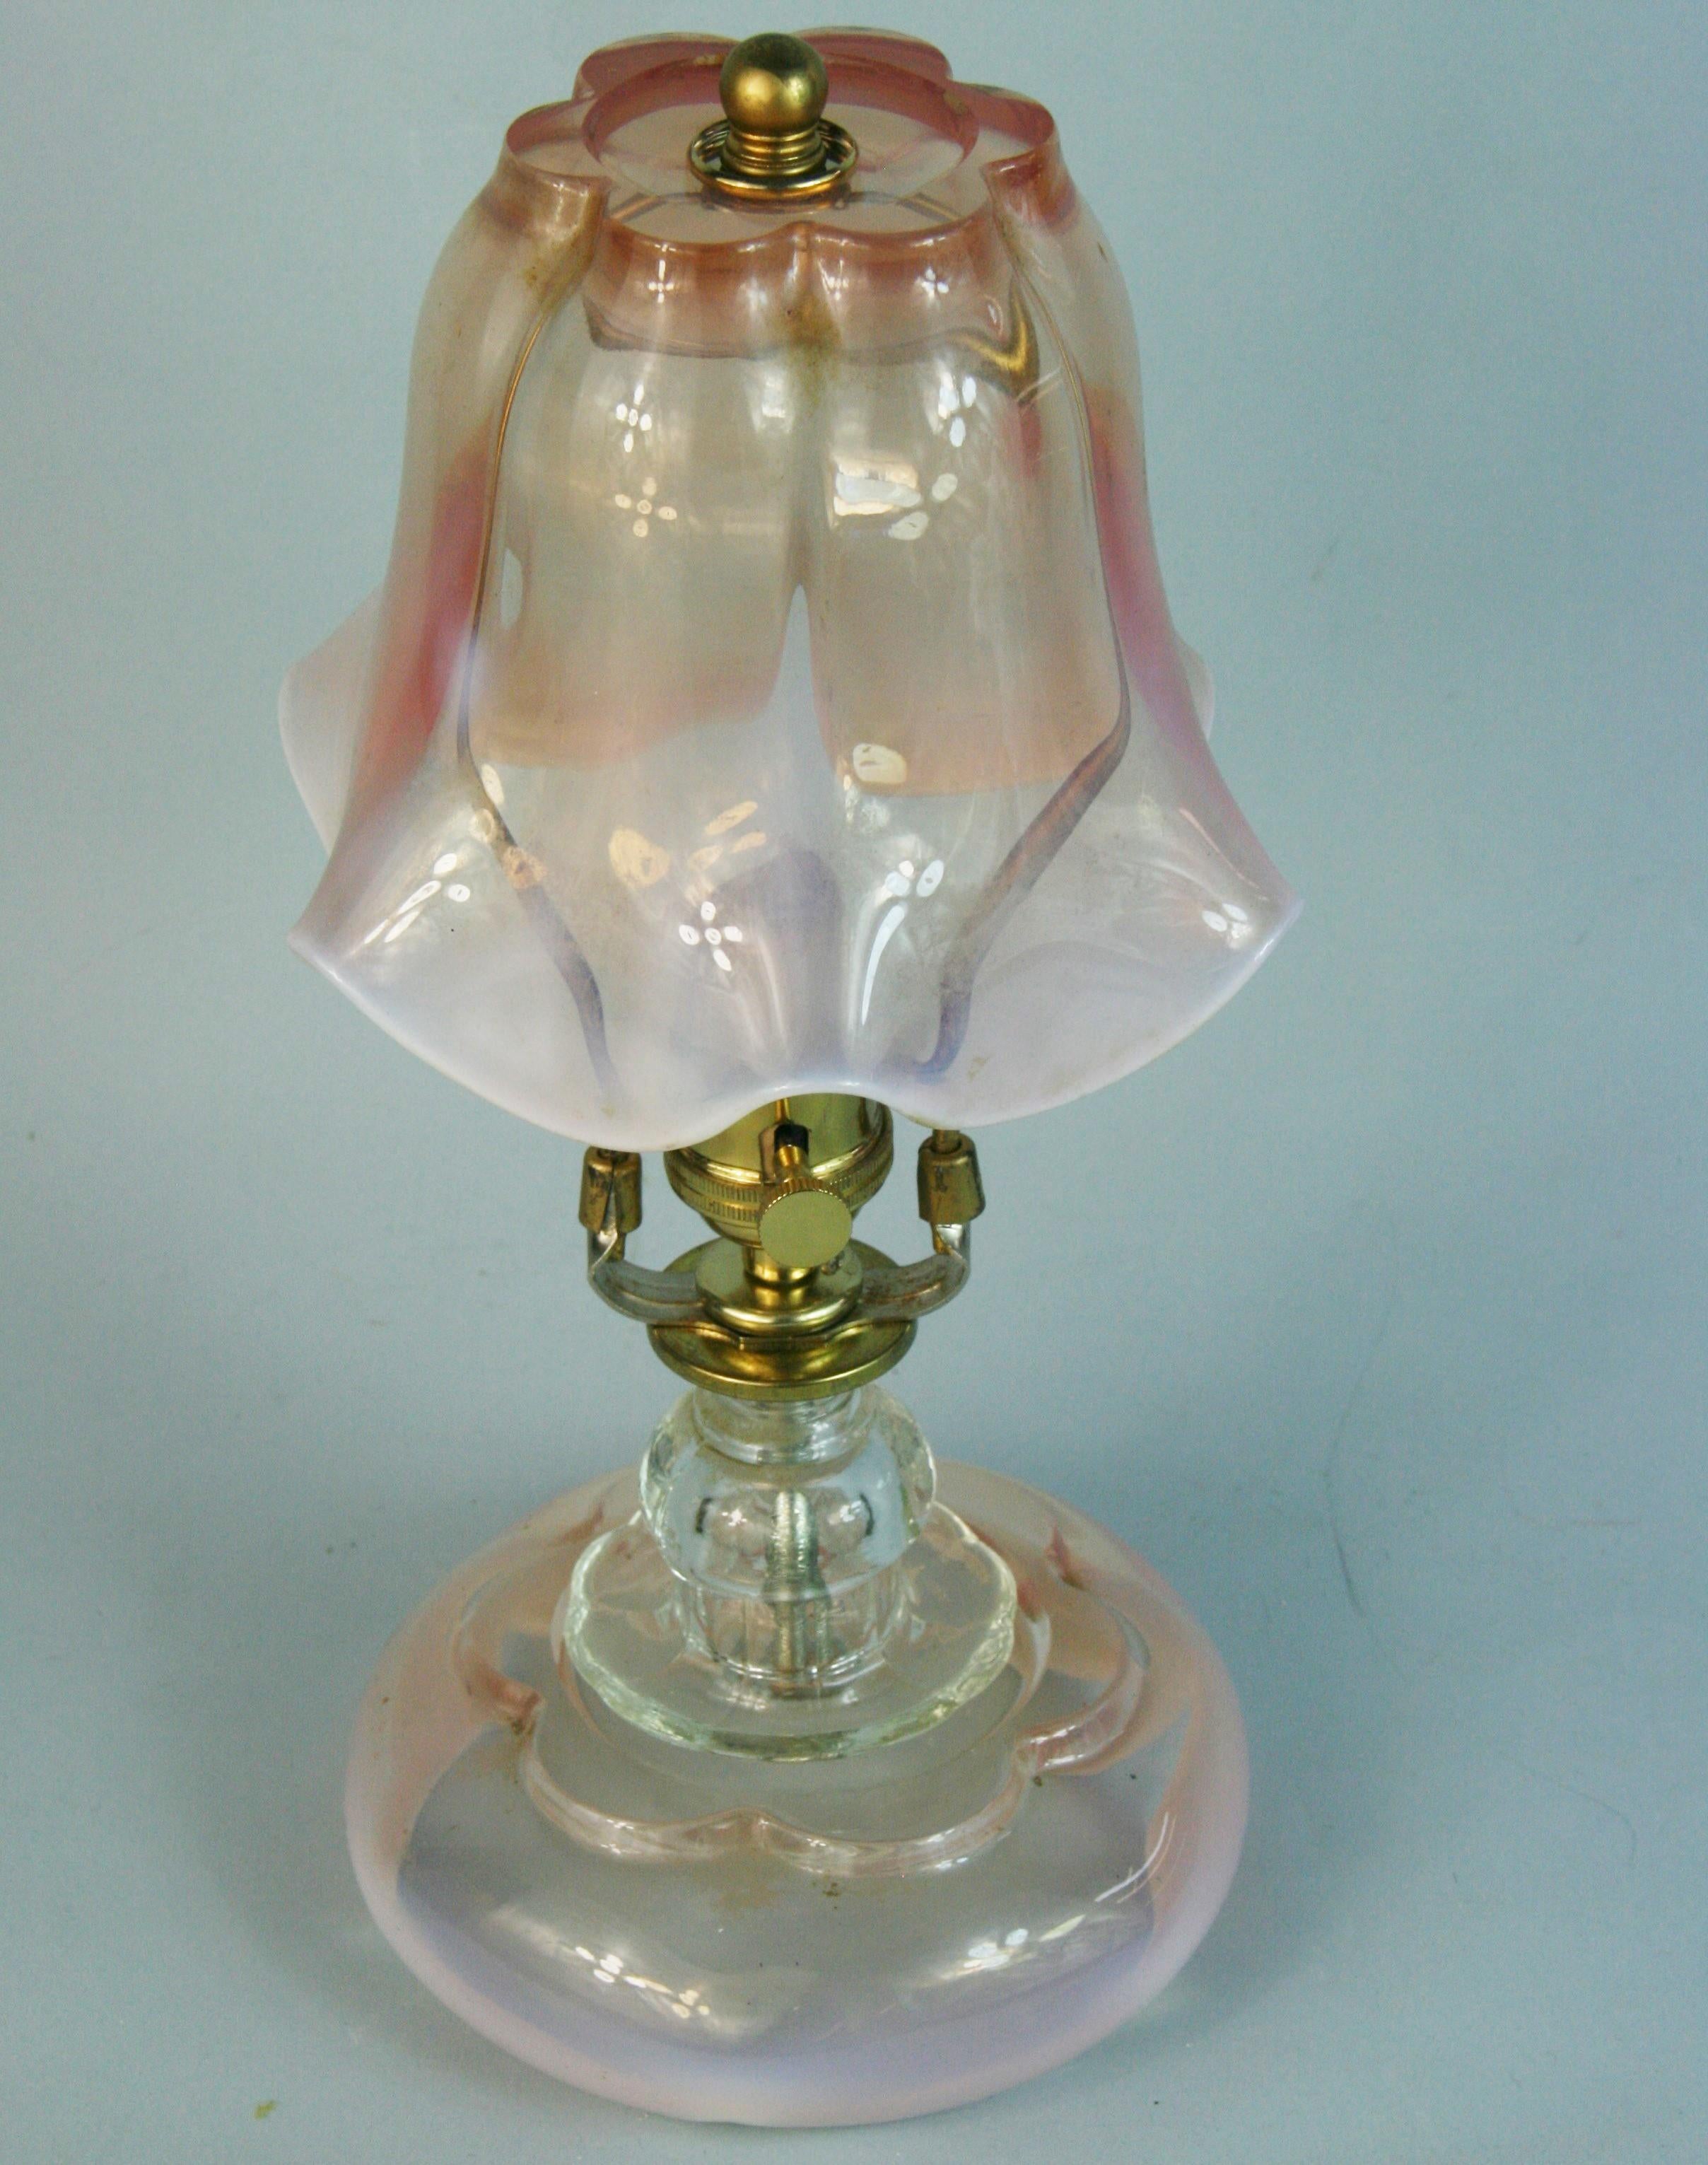 1606 Stunning pair Murano glass lamps from Italy .1940's
Beautiful pale rose ,white and clear glass .
Bell shade with scolloped rim shade.
Clear glass seperation from the glass shade and base
Rewired takes on 60 watt Edison based bulb